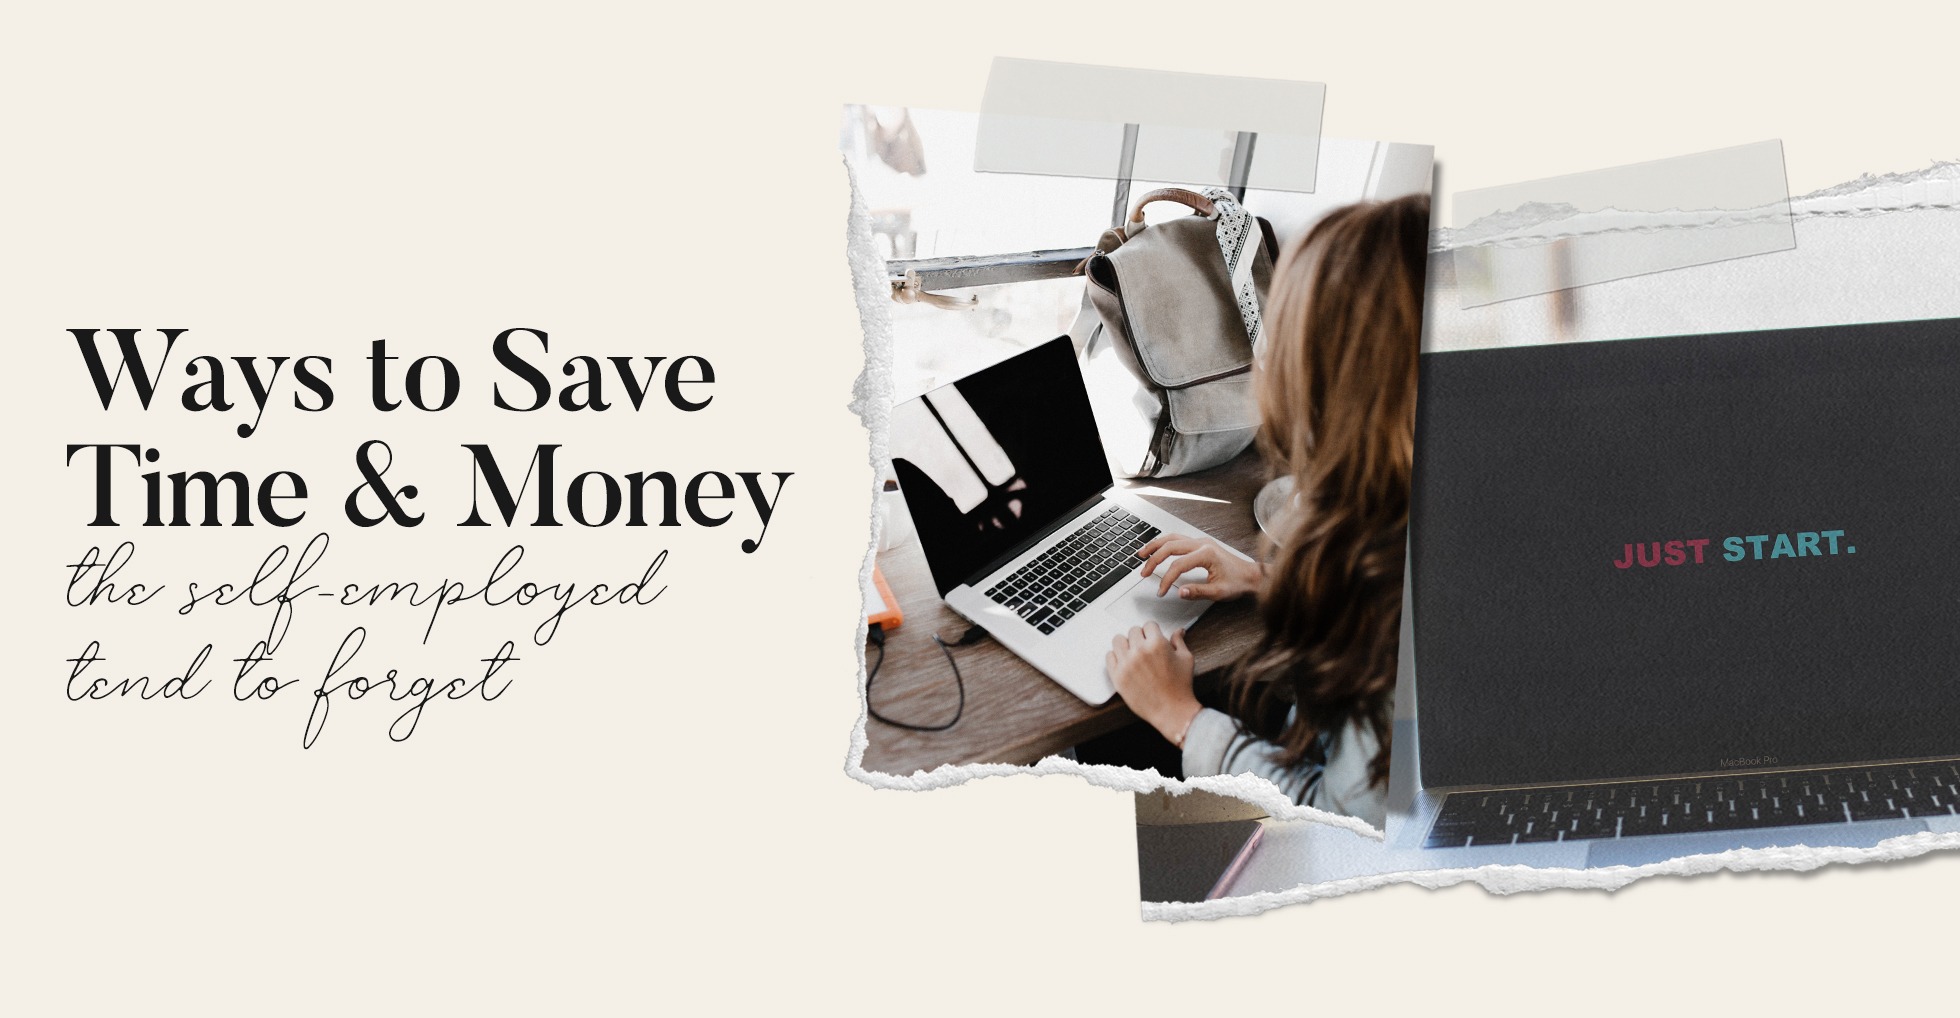 Ways to Save Time & Money that The Self-Employed Tend To Forget